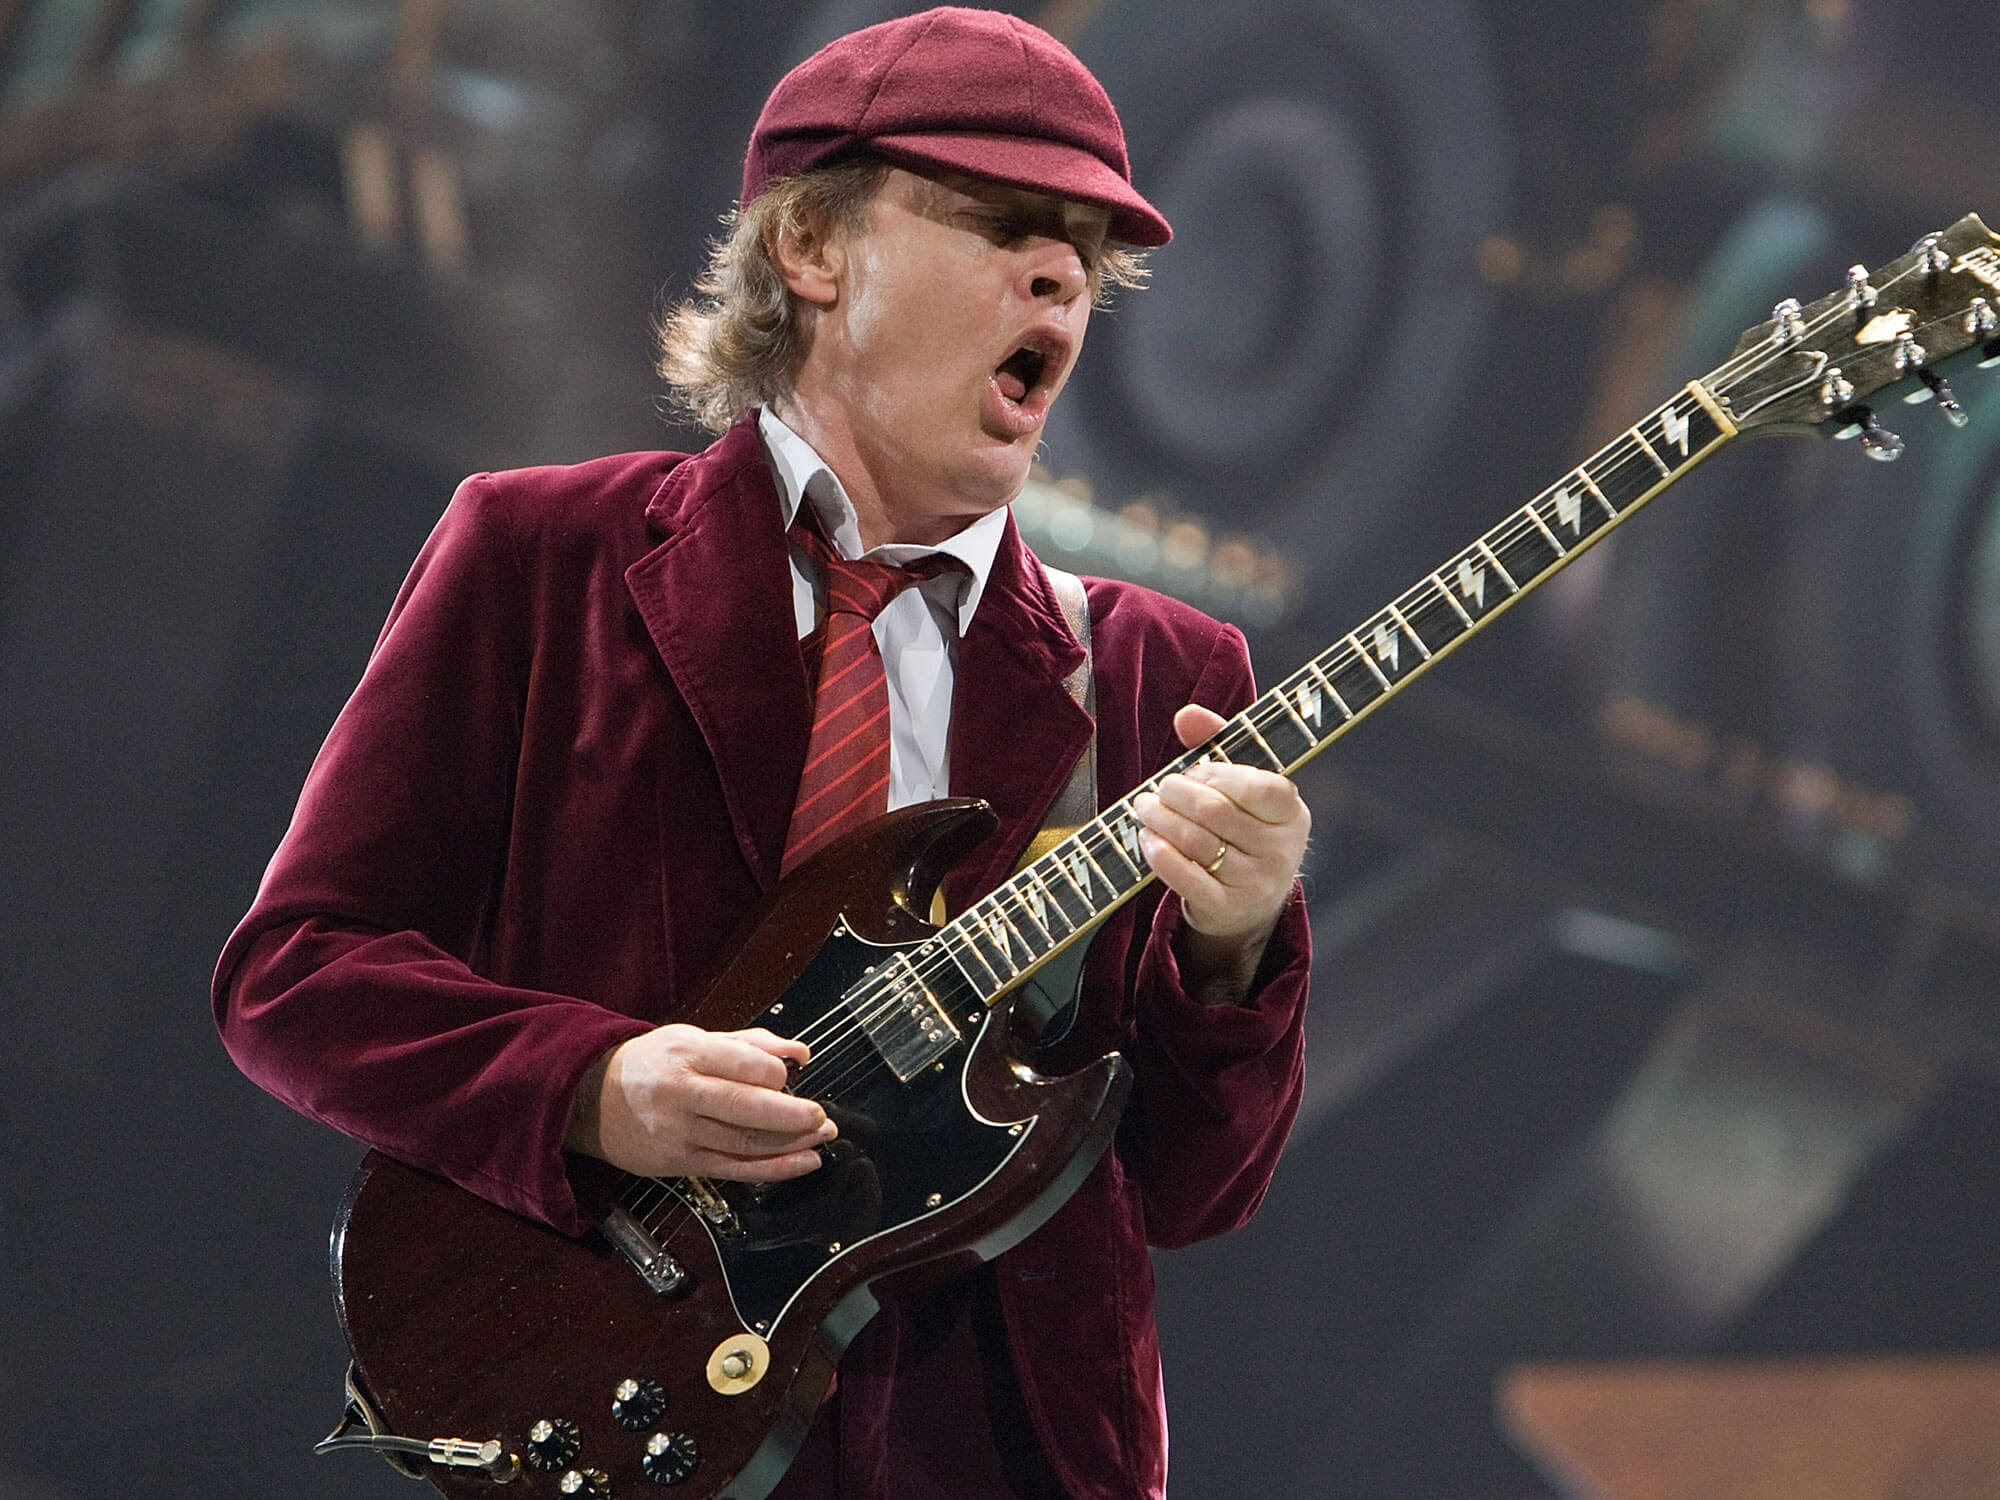 Angus Young performing live